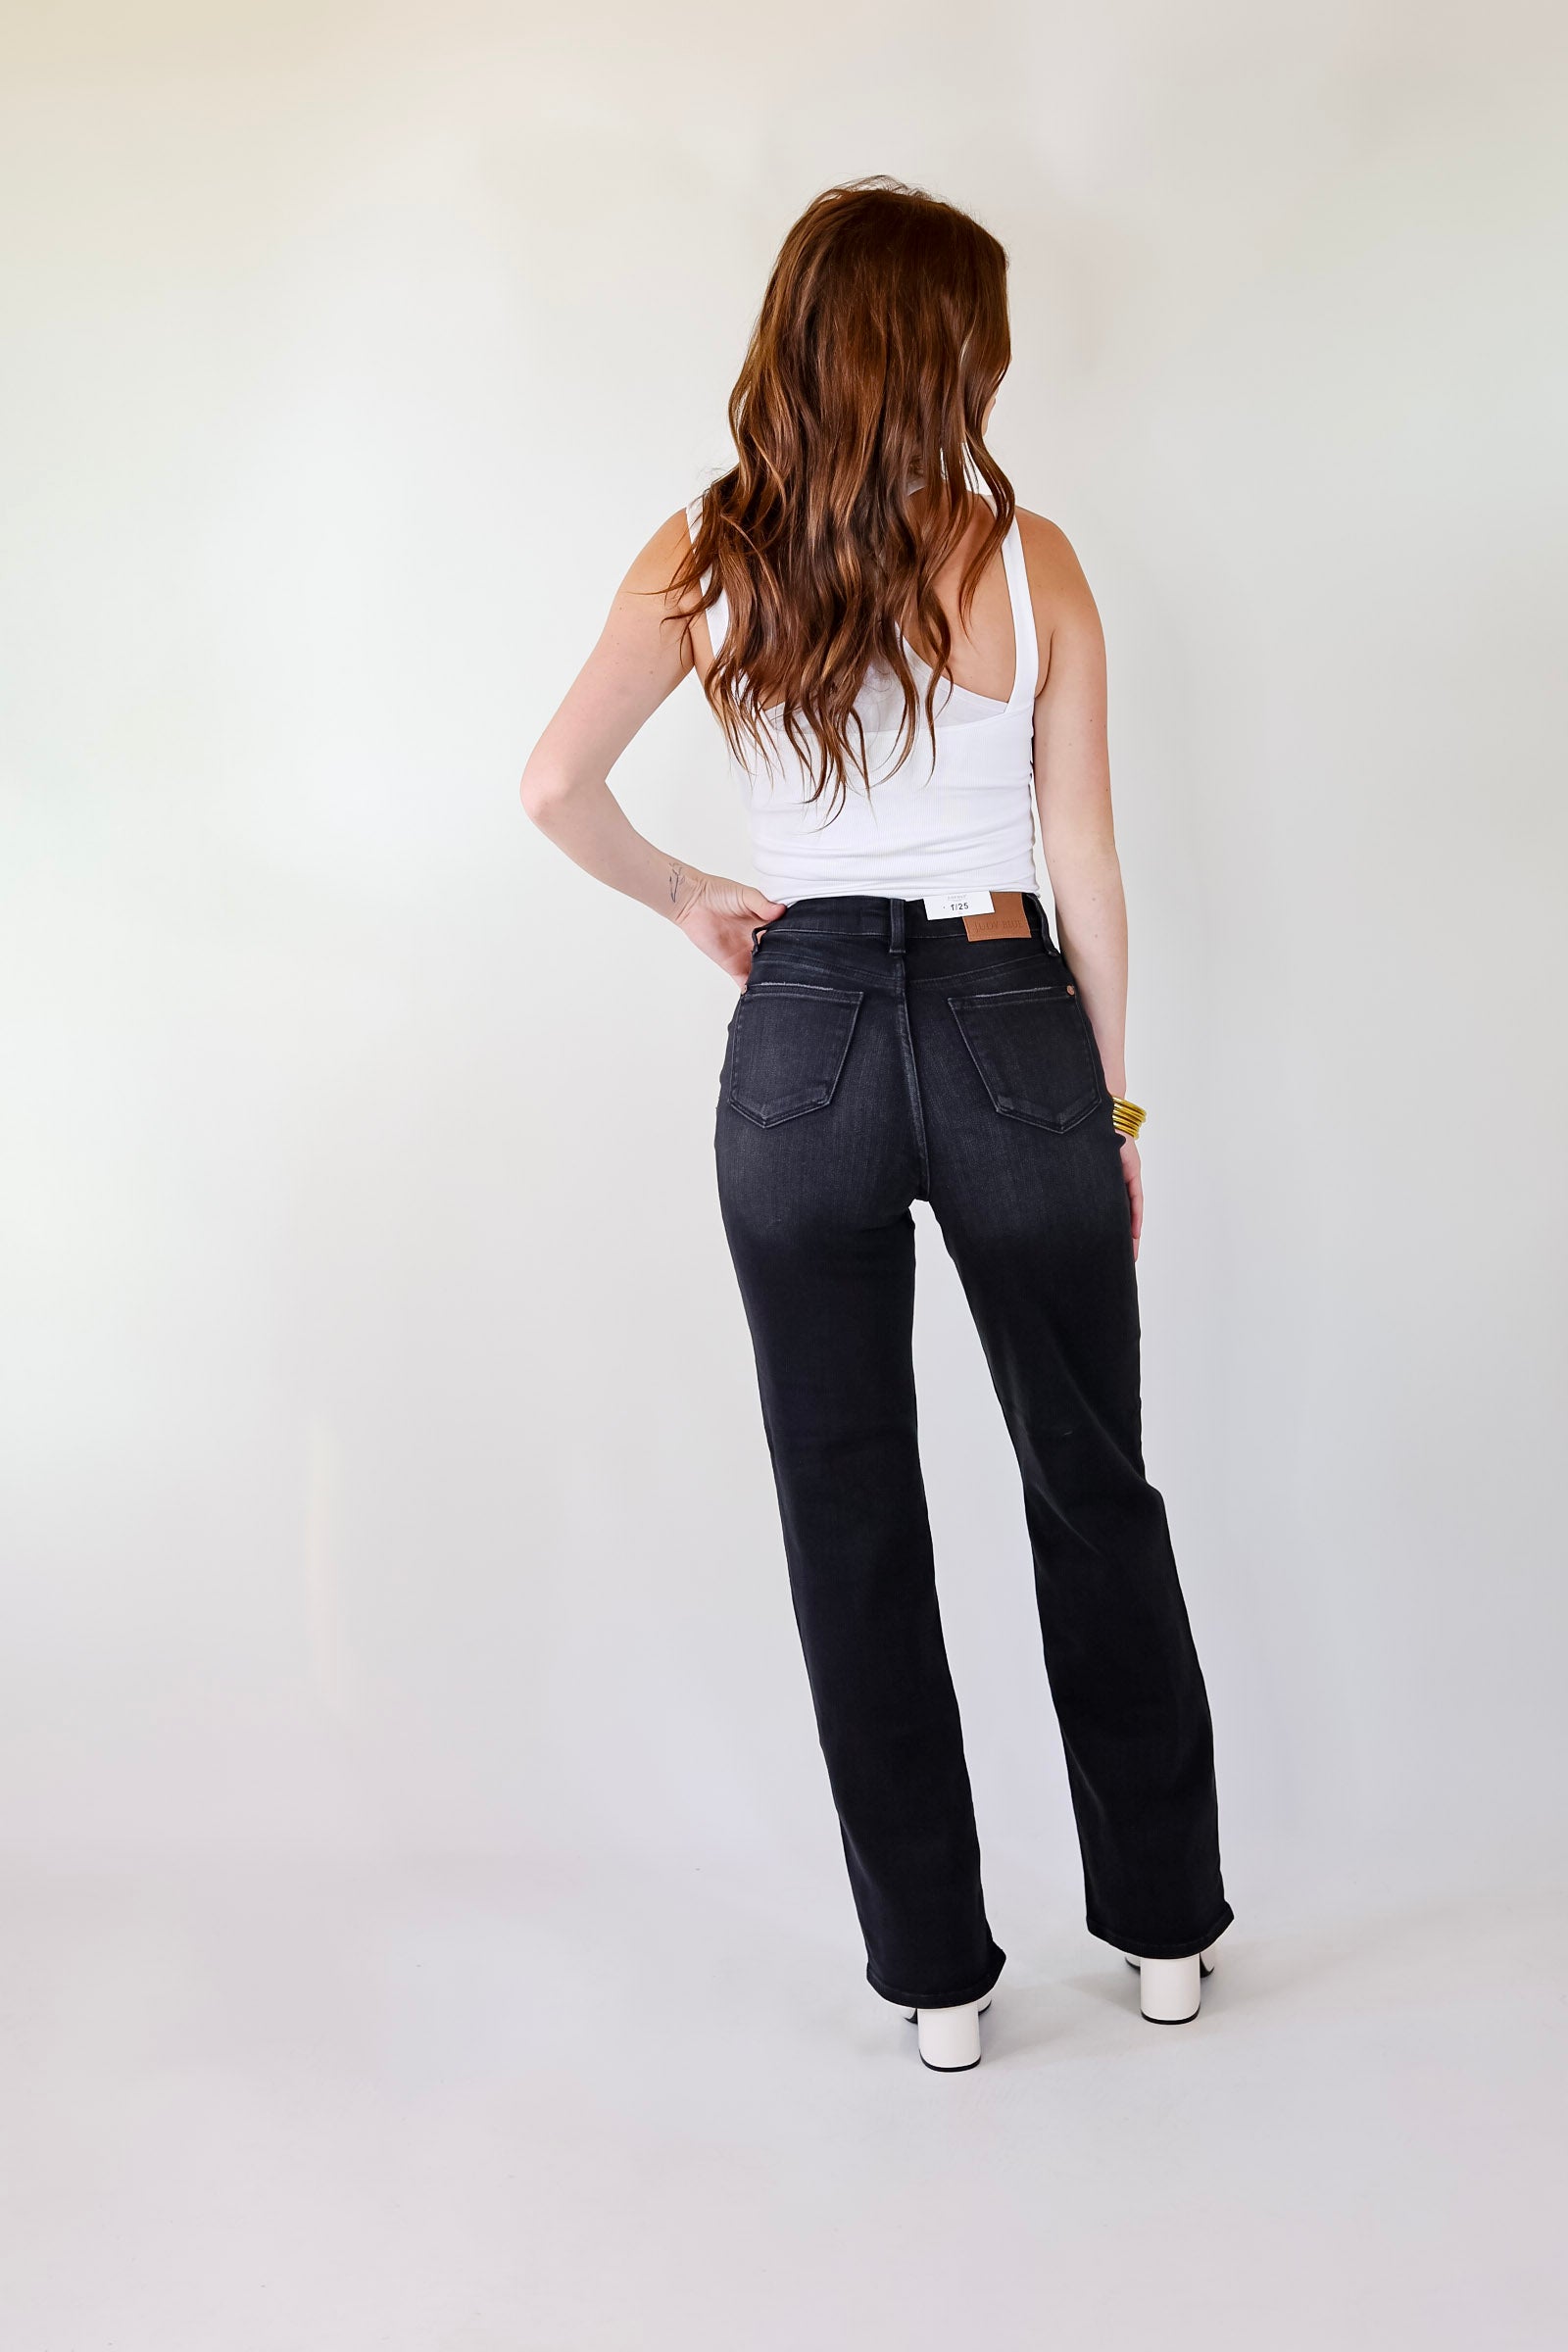 Judy Blue | Good N' Classic Straight Leg Jeans in Black - Giddy Up Glamour Boutique